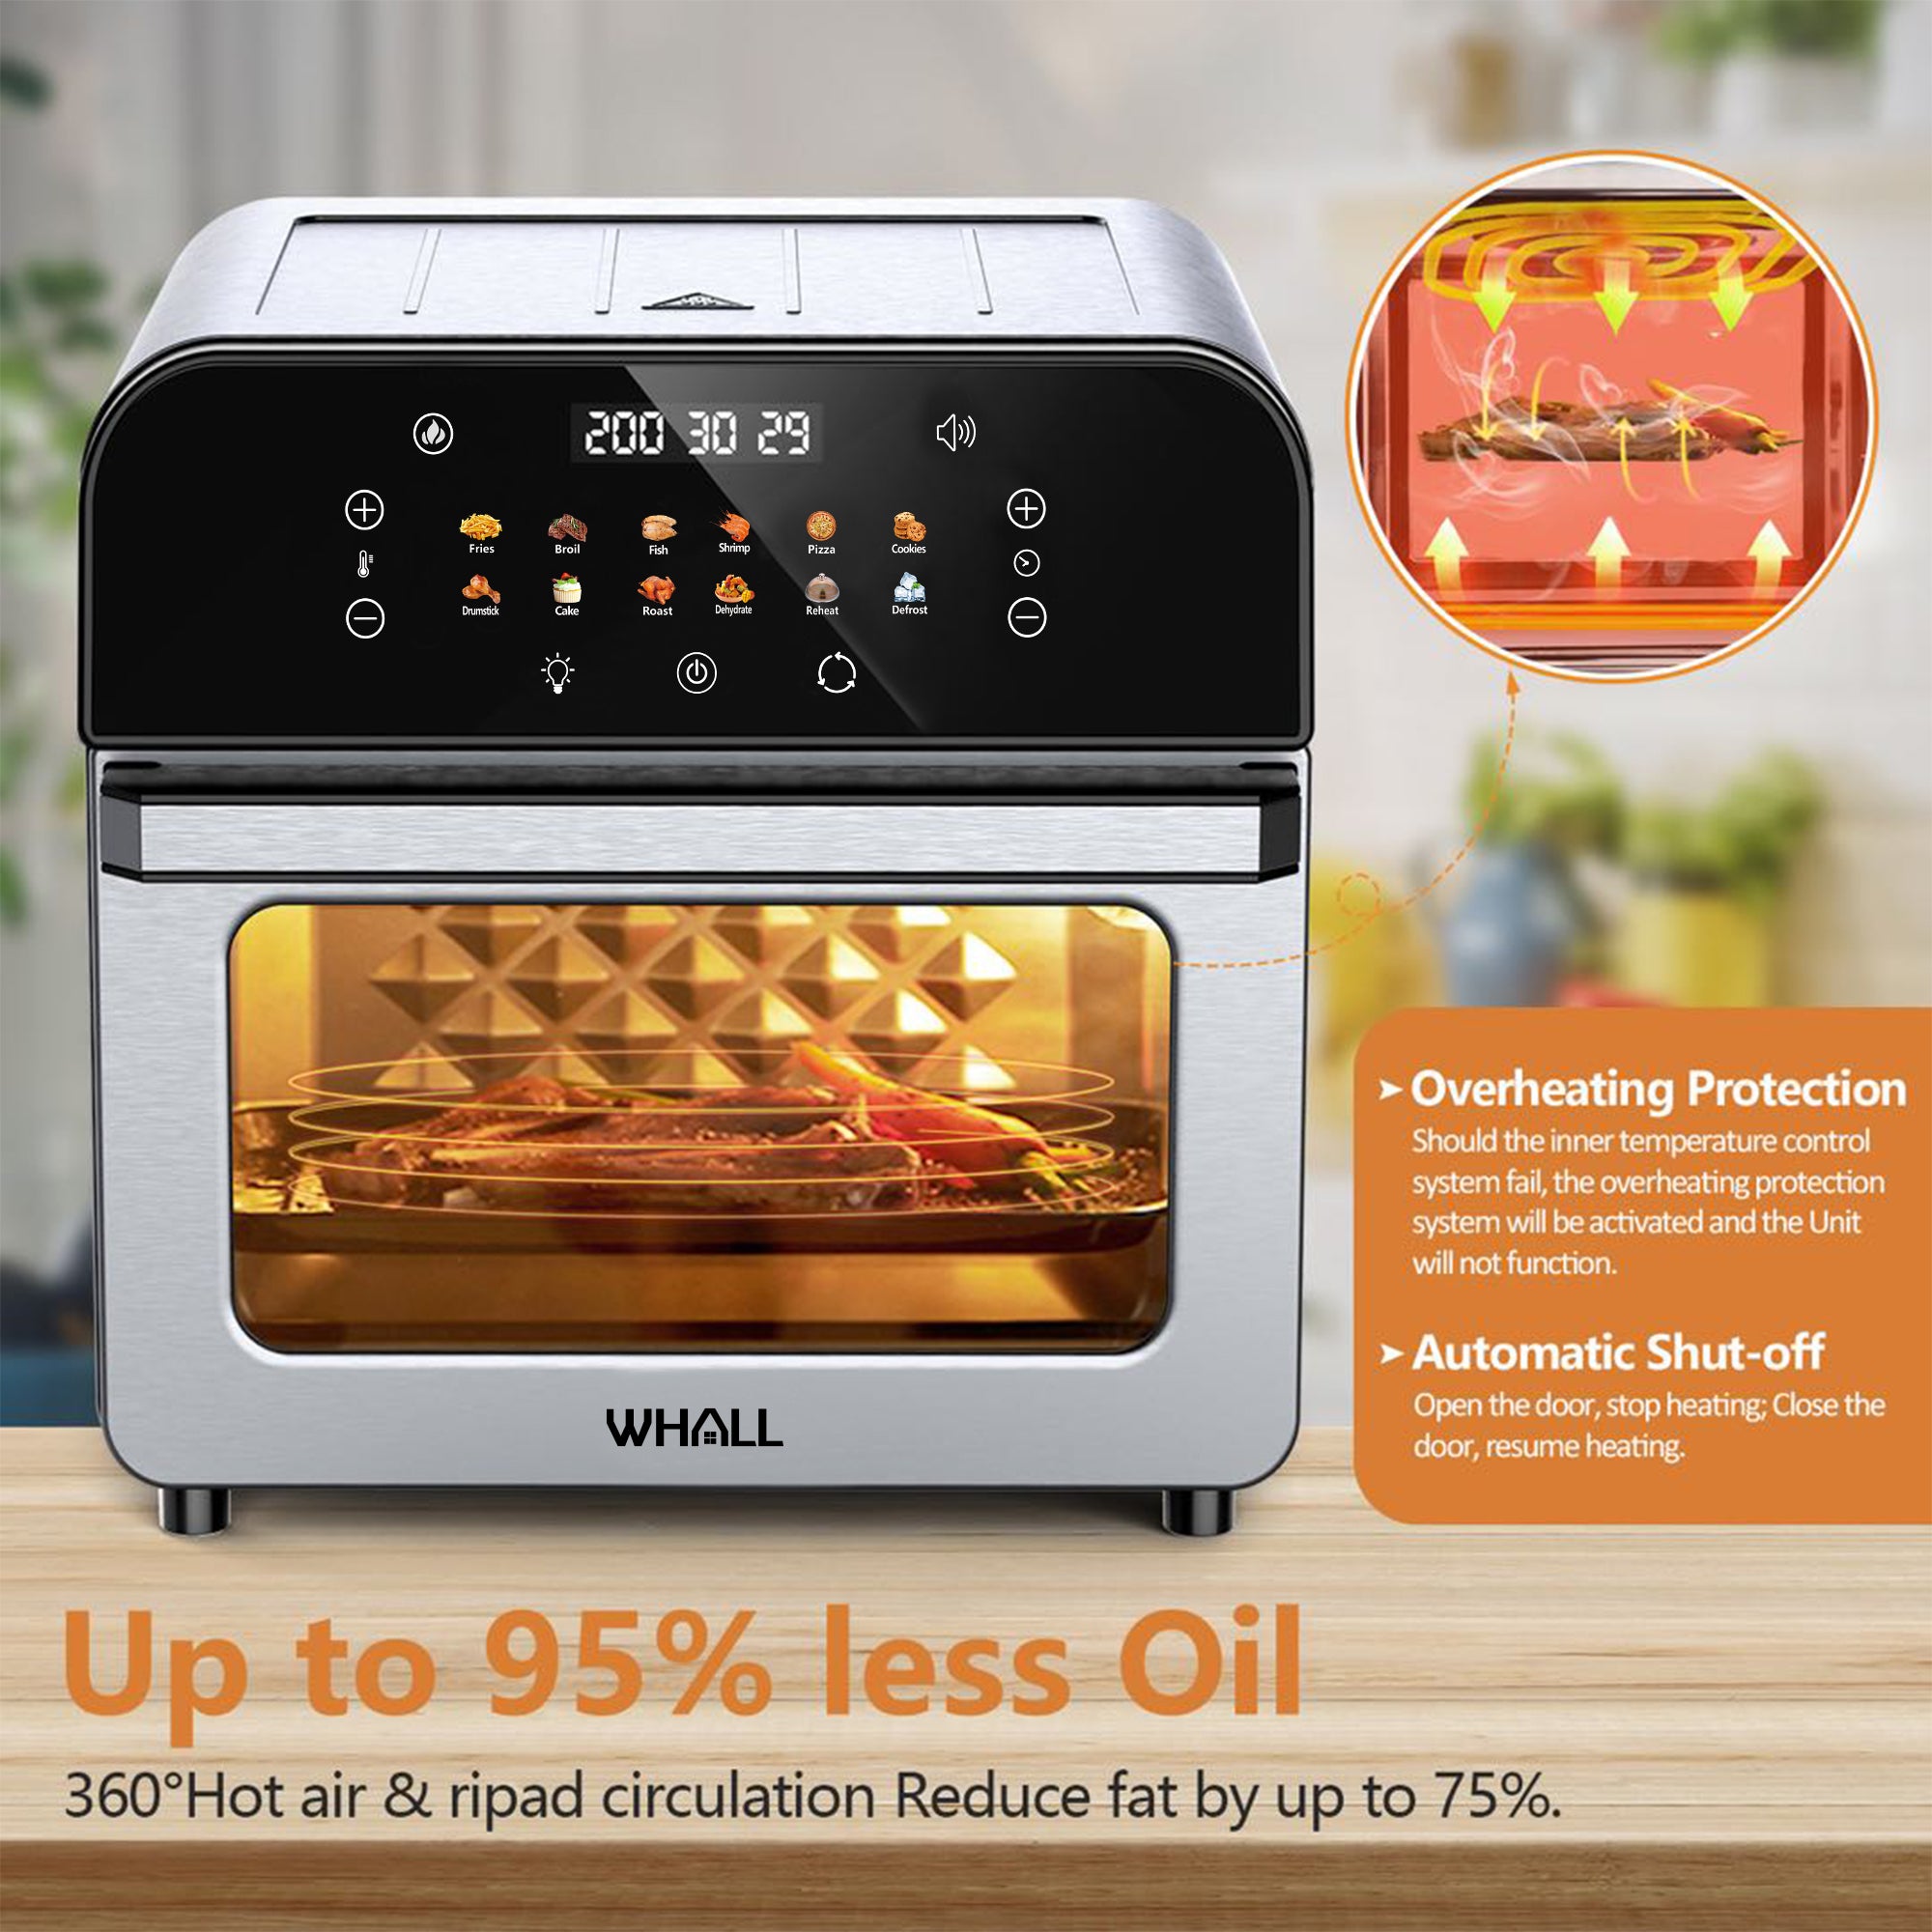 Whall® Air Fryer Oven – 12QT Touchscreen Air Fryer with 12 Pre-set Menus, up to 95% Less Oil, and Clearlook Window